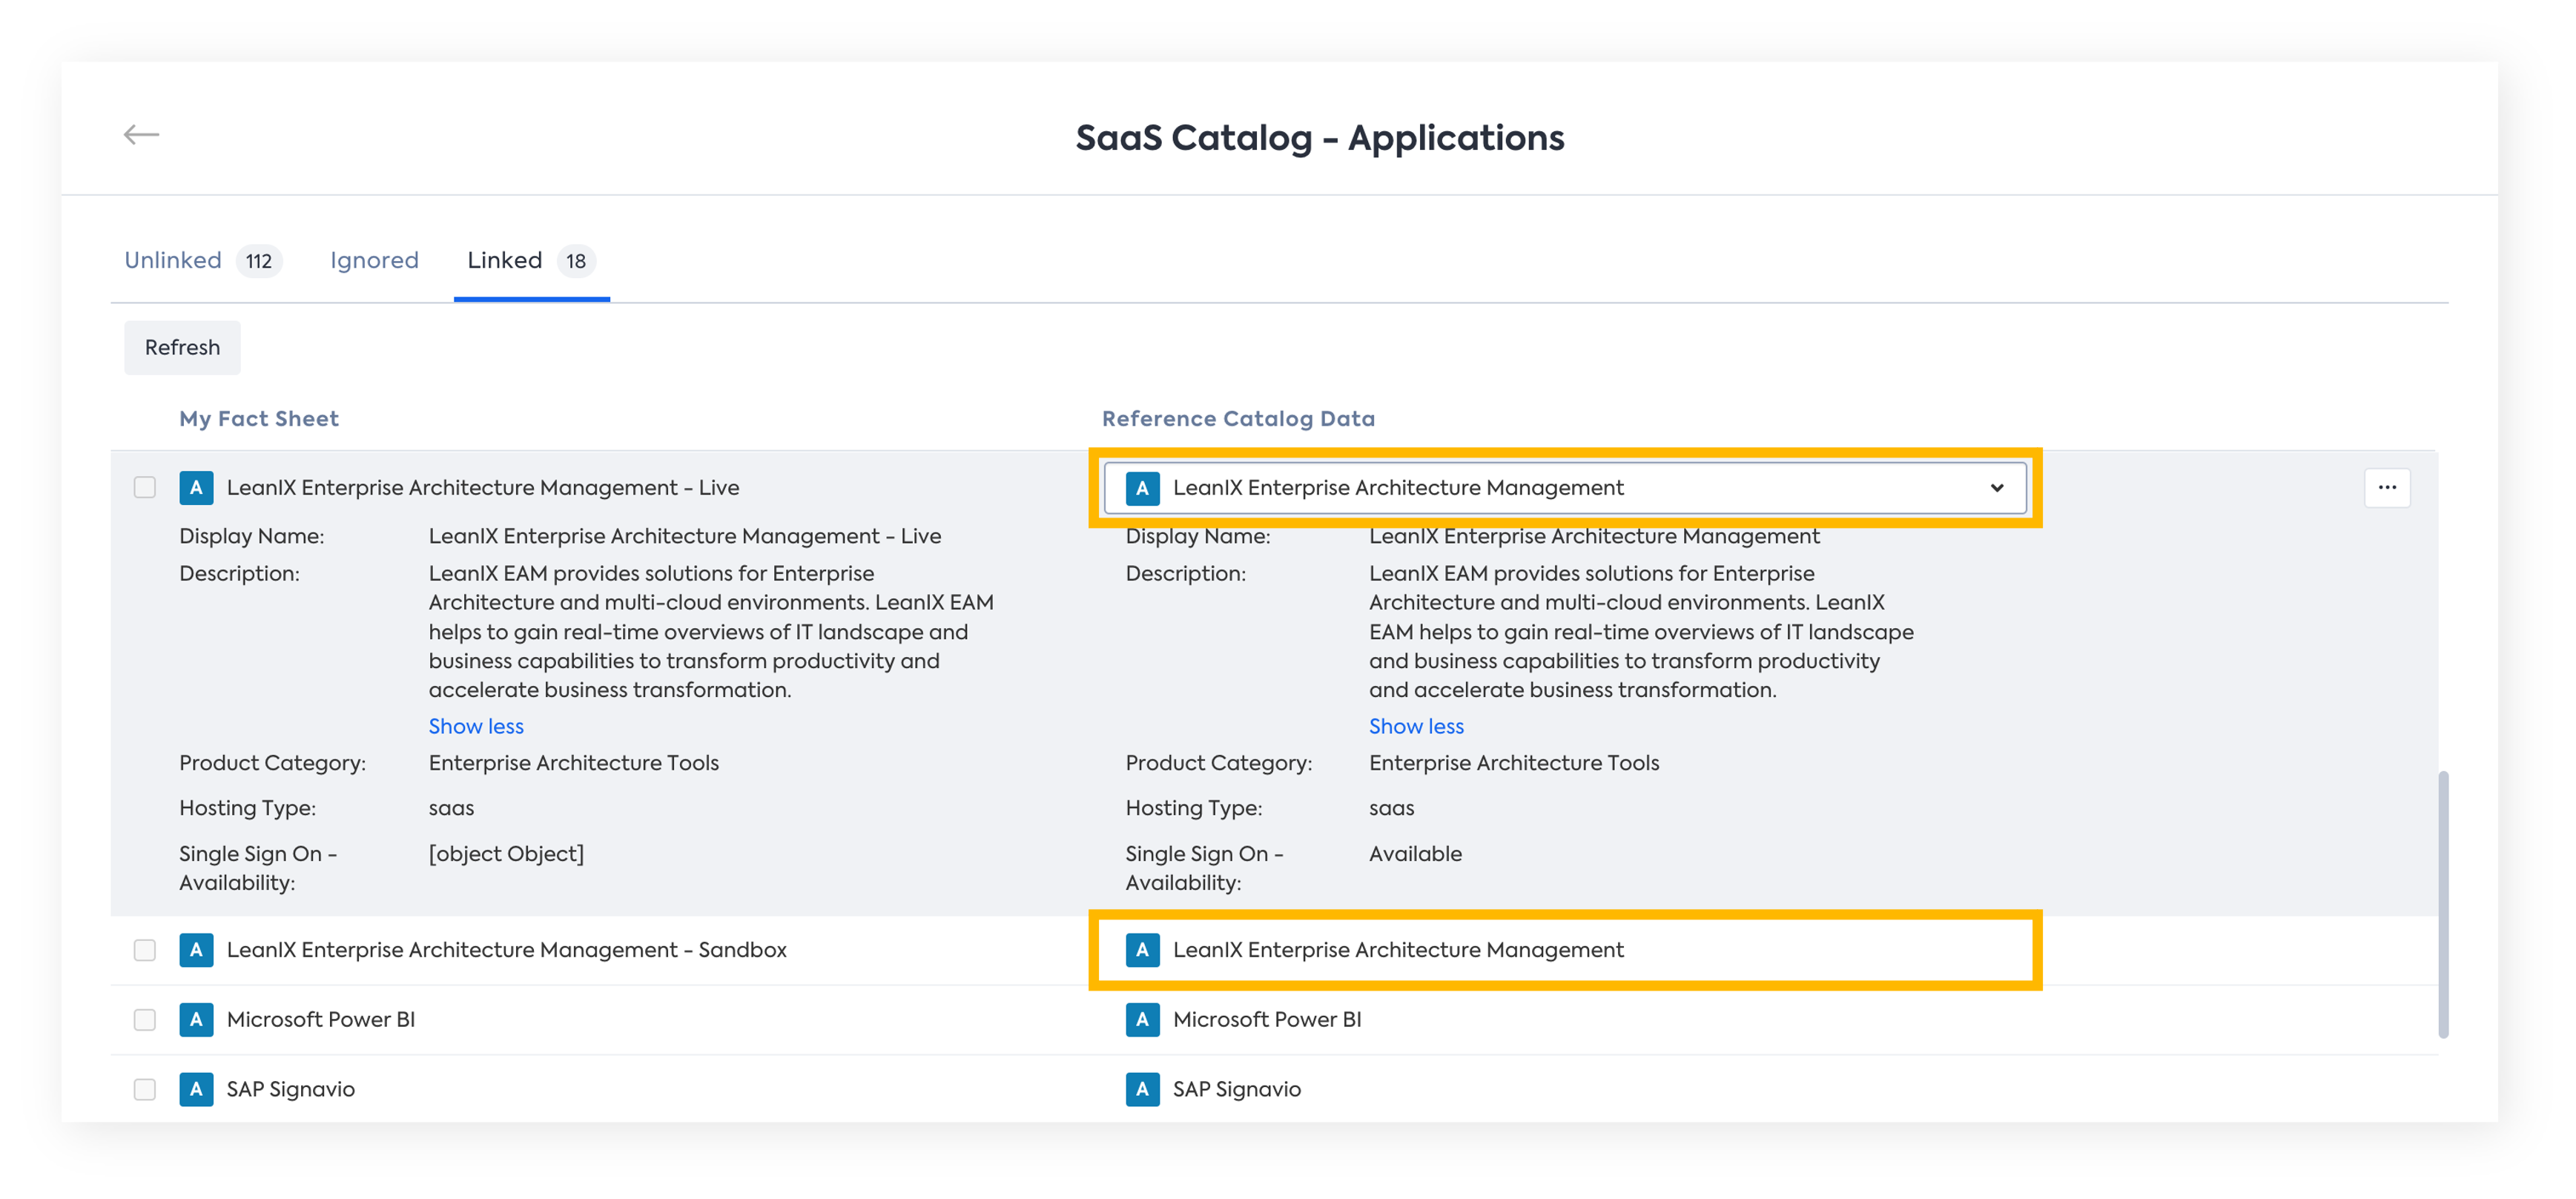 Linking Multiple Applications to the Same Entry of SaaS Catalog